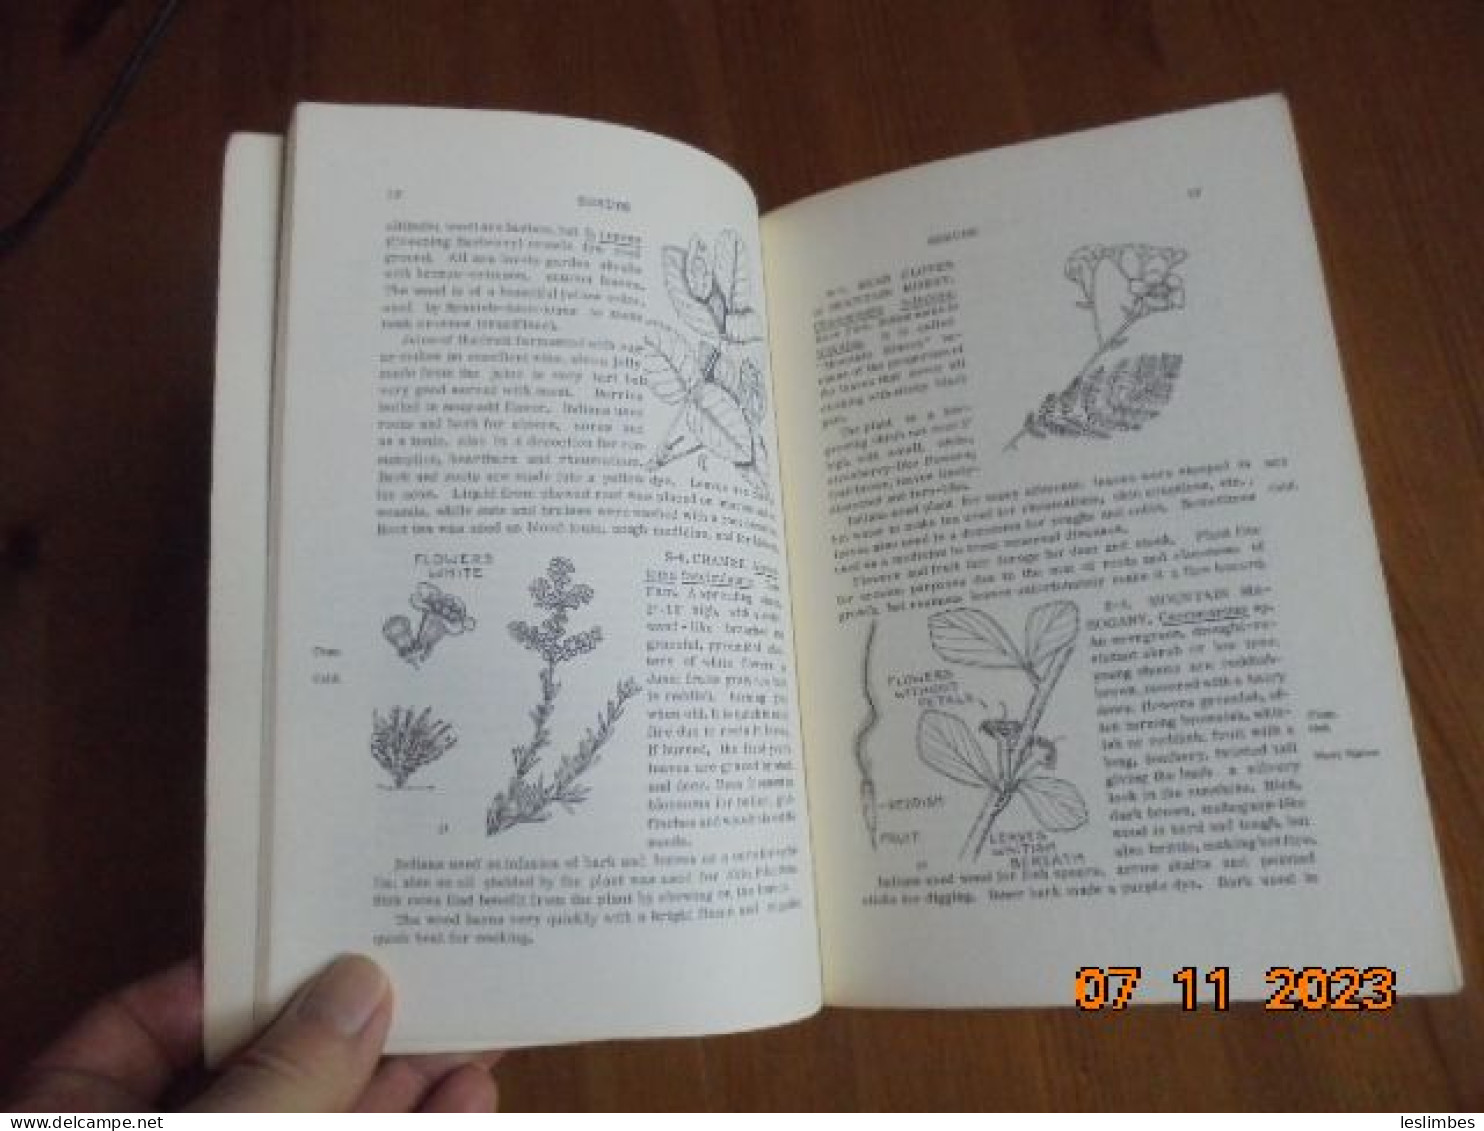 Common Edible And Useful Plants Of The West: With Illustrations Of 116 Plants - Muriel Sweet - Naturegraph 1962 - Wildlife